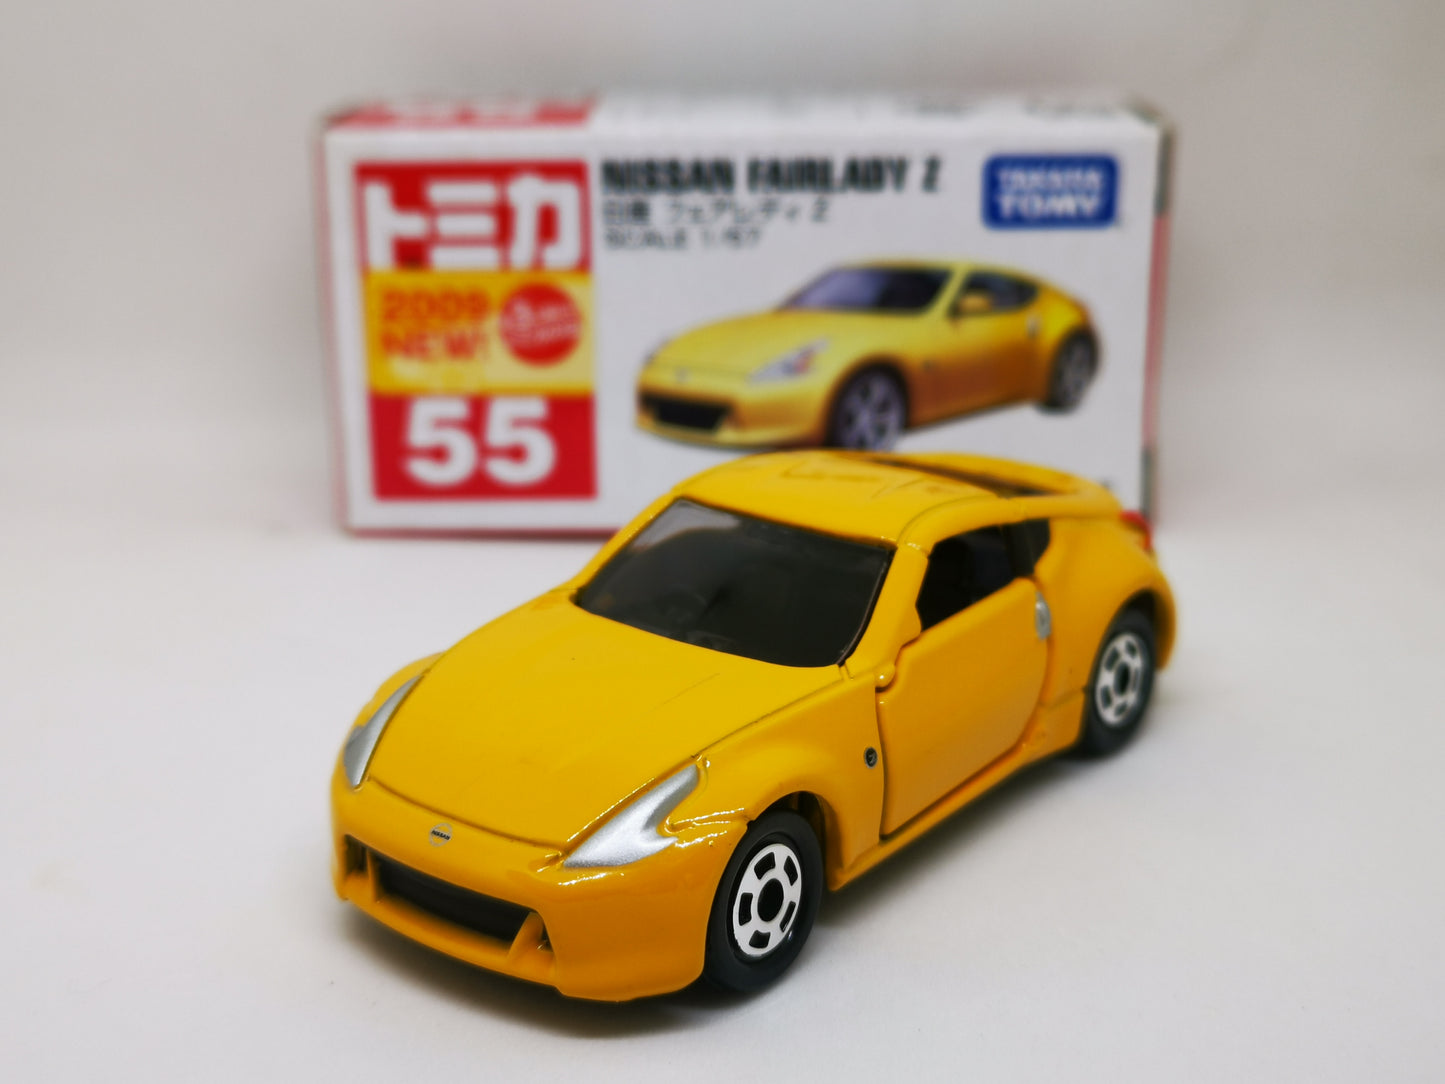 Tomica #55 Nissan Fairlady Z 2009 edition